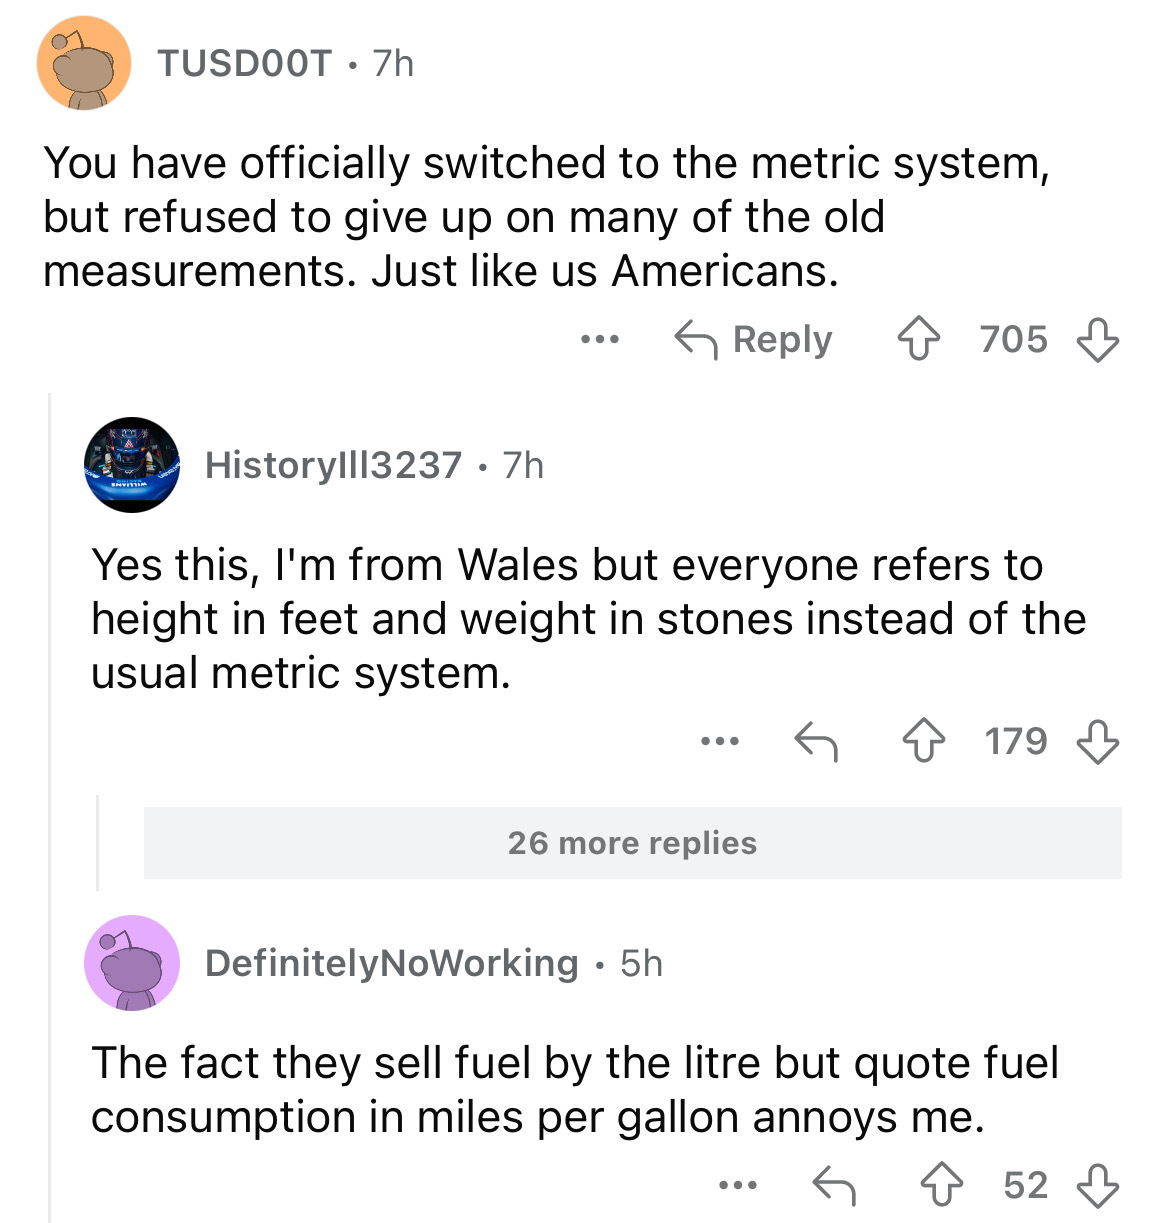 screenshot - Tusdoot 7h You have officially switched to the metric system, but refused to give up on many of the old measurements. Just us Americans. ... 705 History|||3237 .7h Yes this, I'm from Wales but everyone refers to height in feet and weight in s